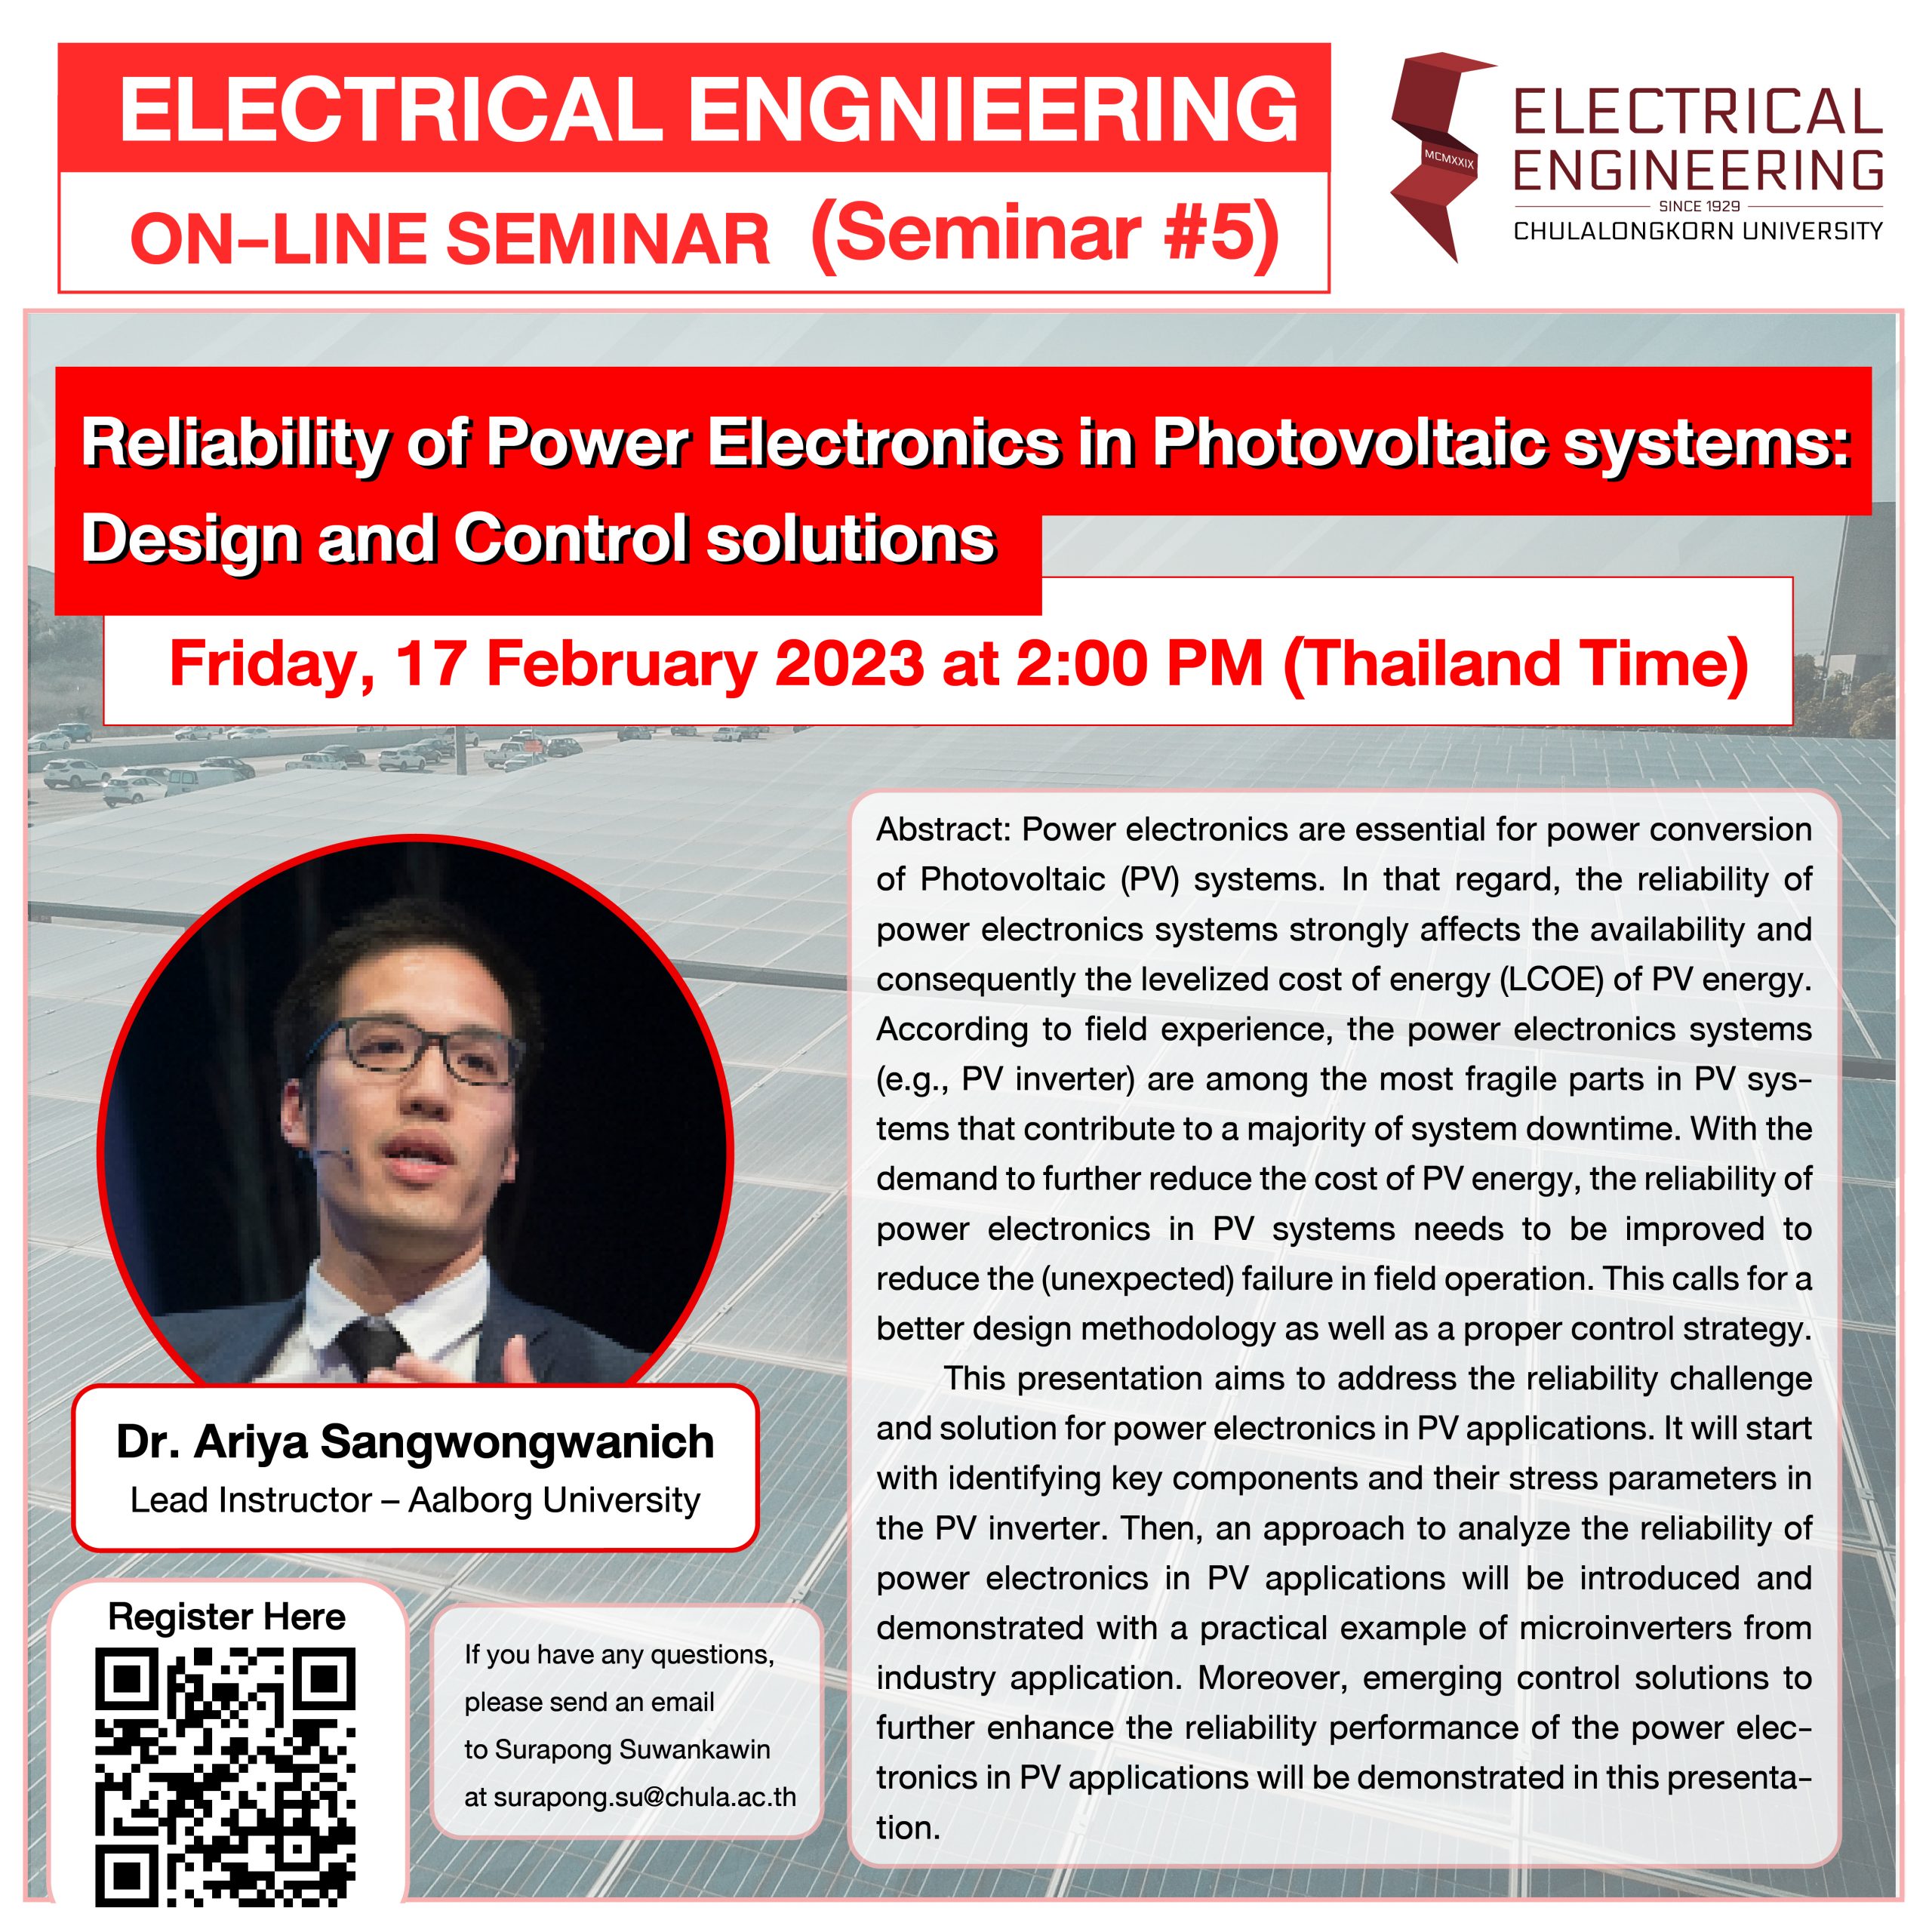 ELECTRICAL ENGNIEERING ON-LINE SEMINAR (Seminar #5) "Reliability of Power Electronics in Photovoltaic systems: Design and Control solutions"